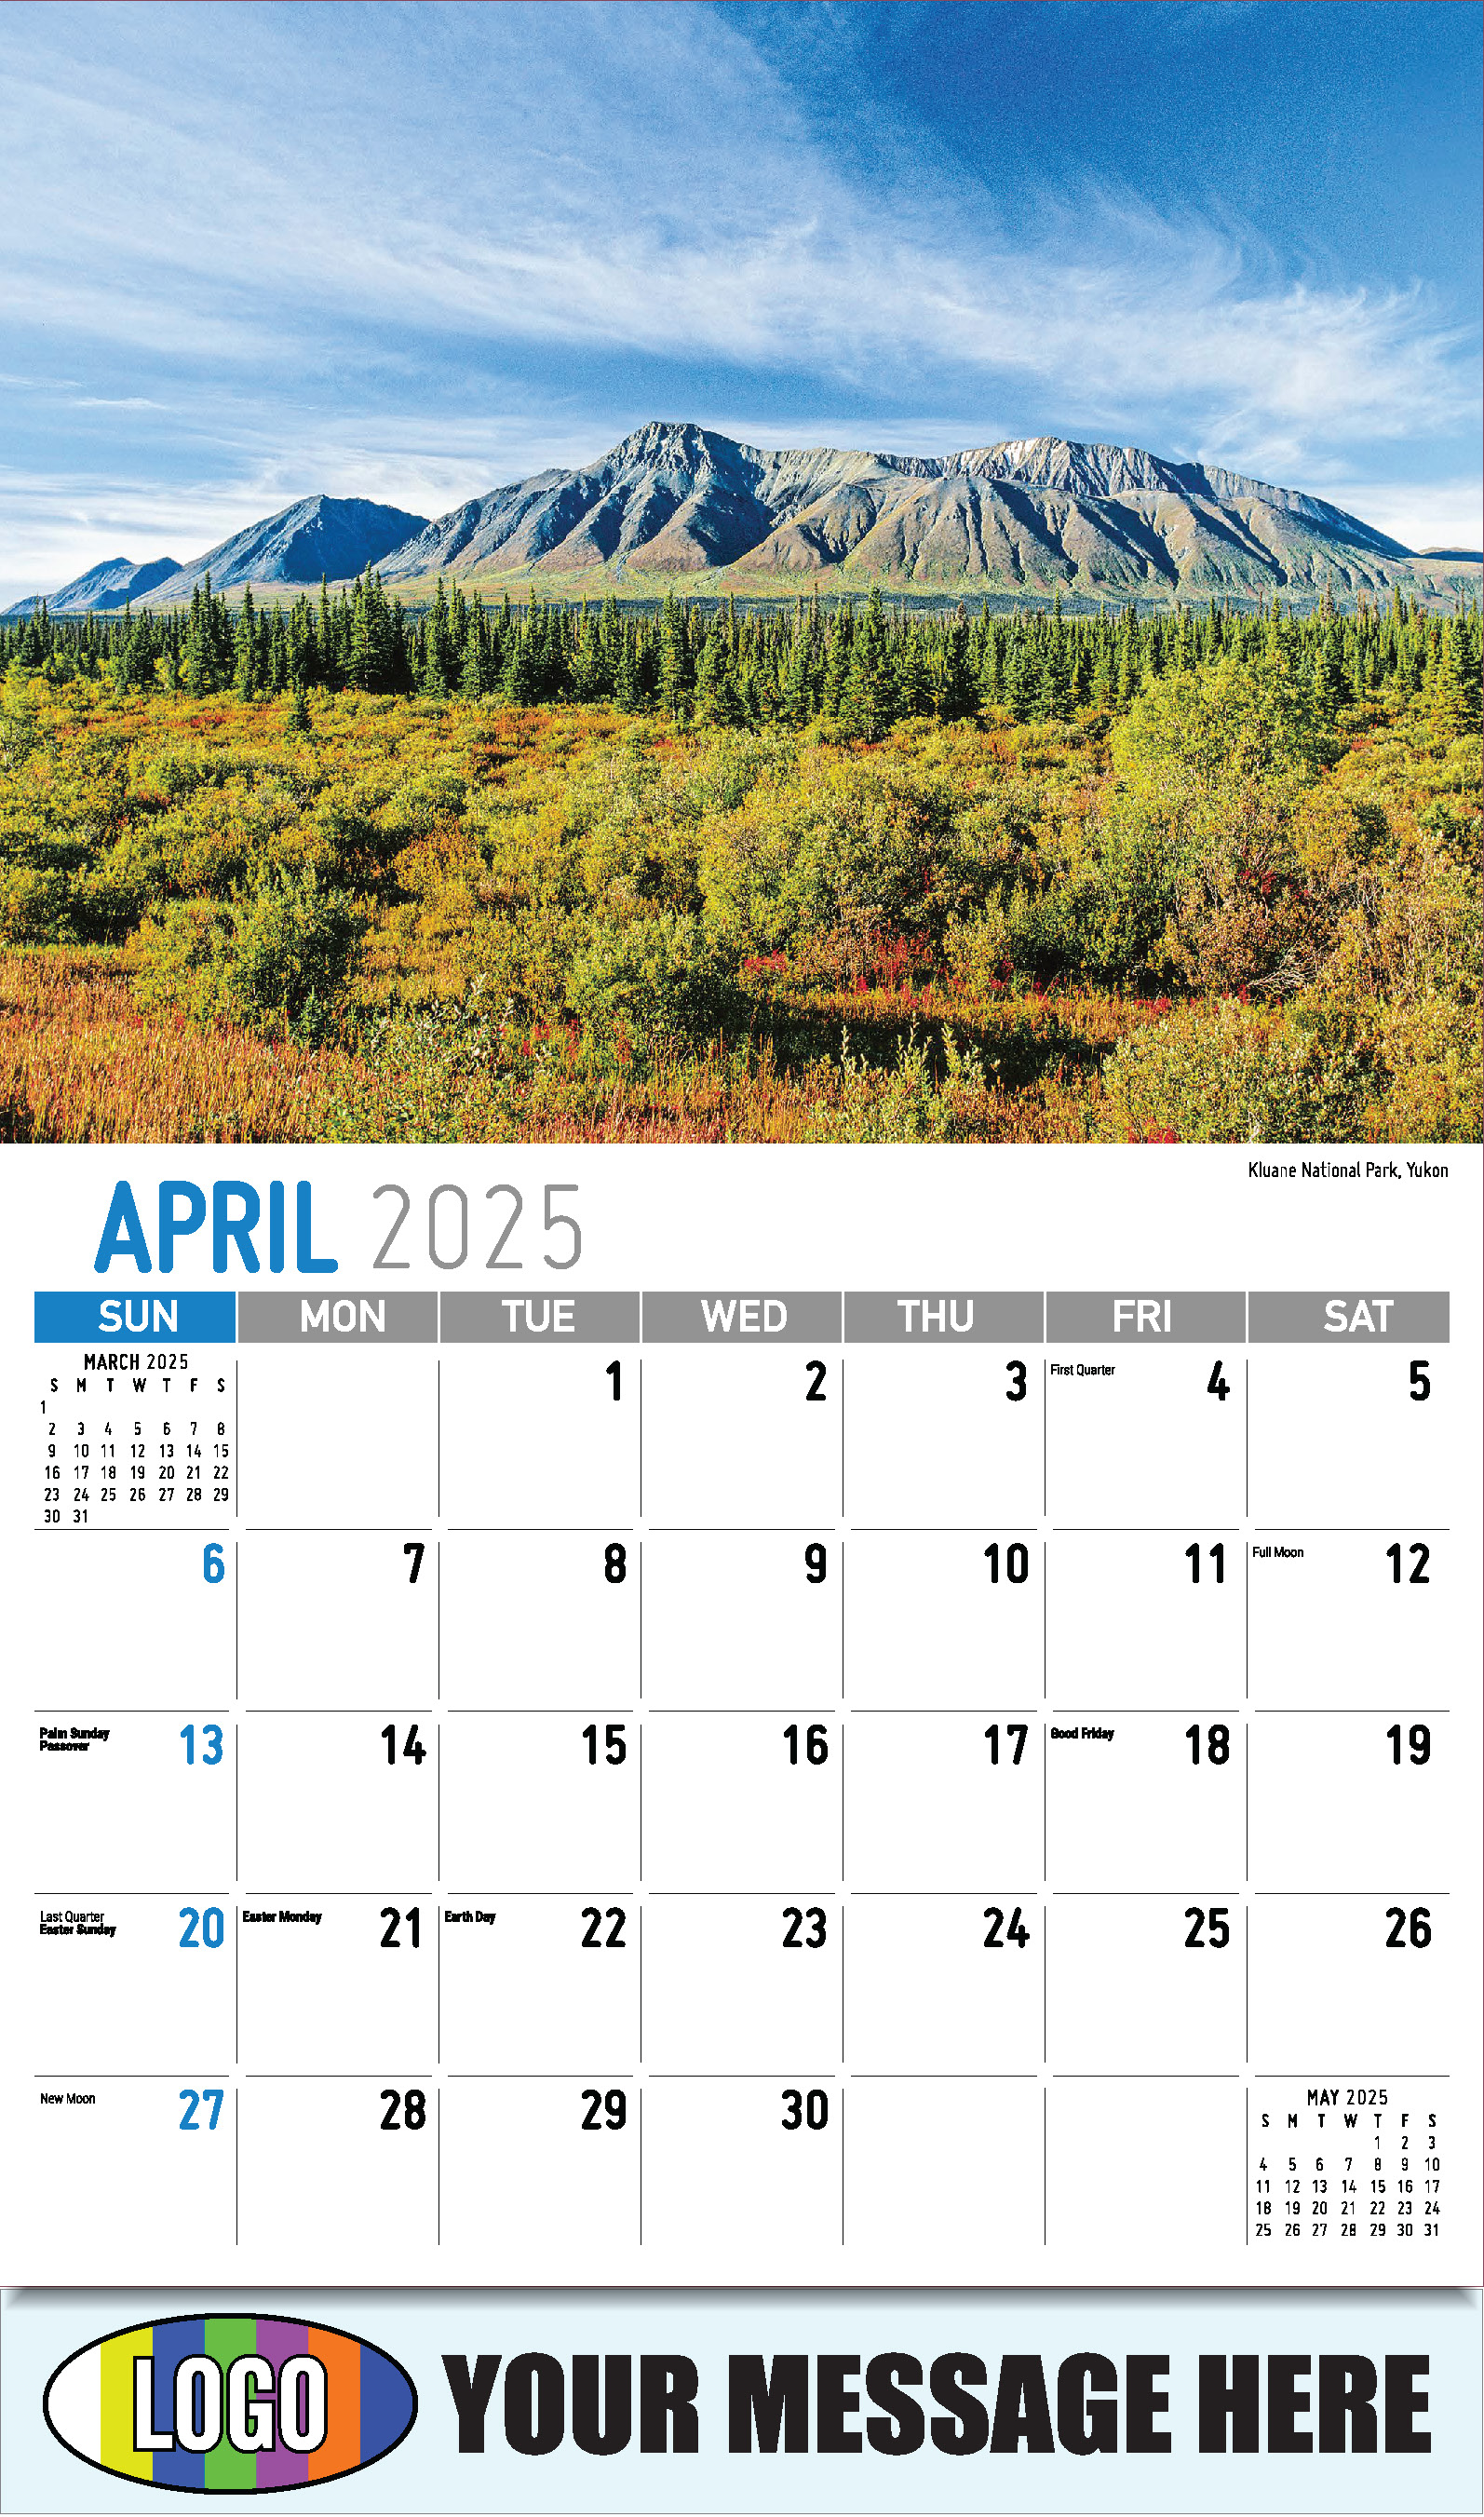 Scenes of Western Canada 2025 Business Promotional Wall Calendar - April